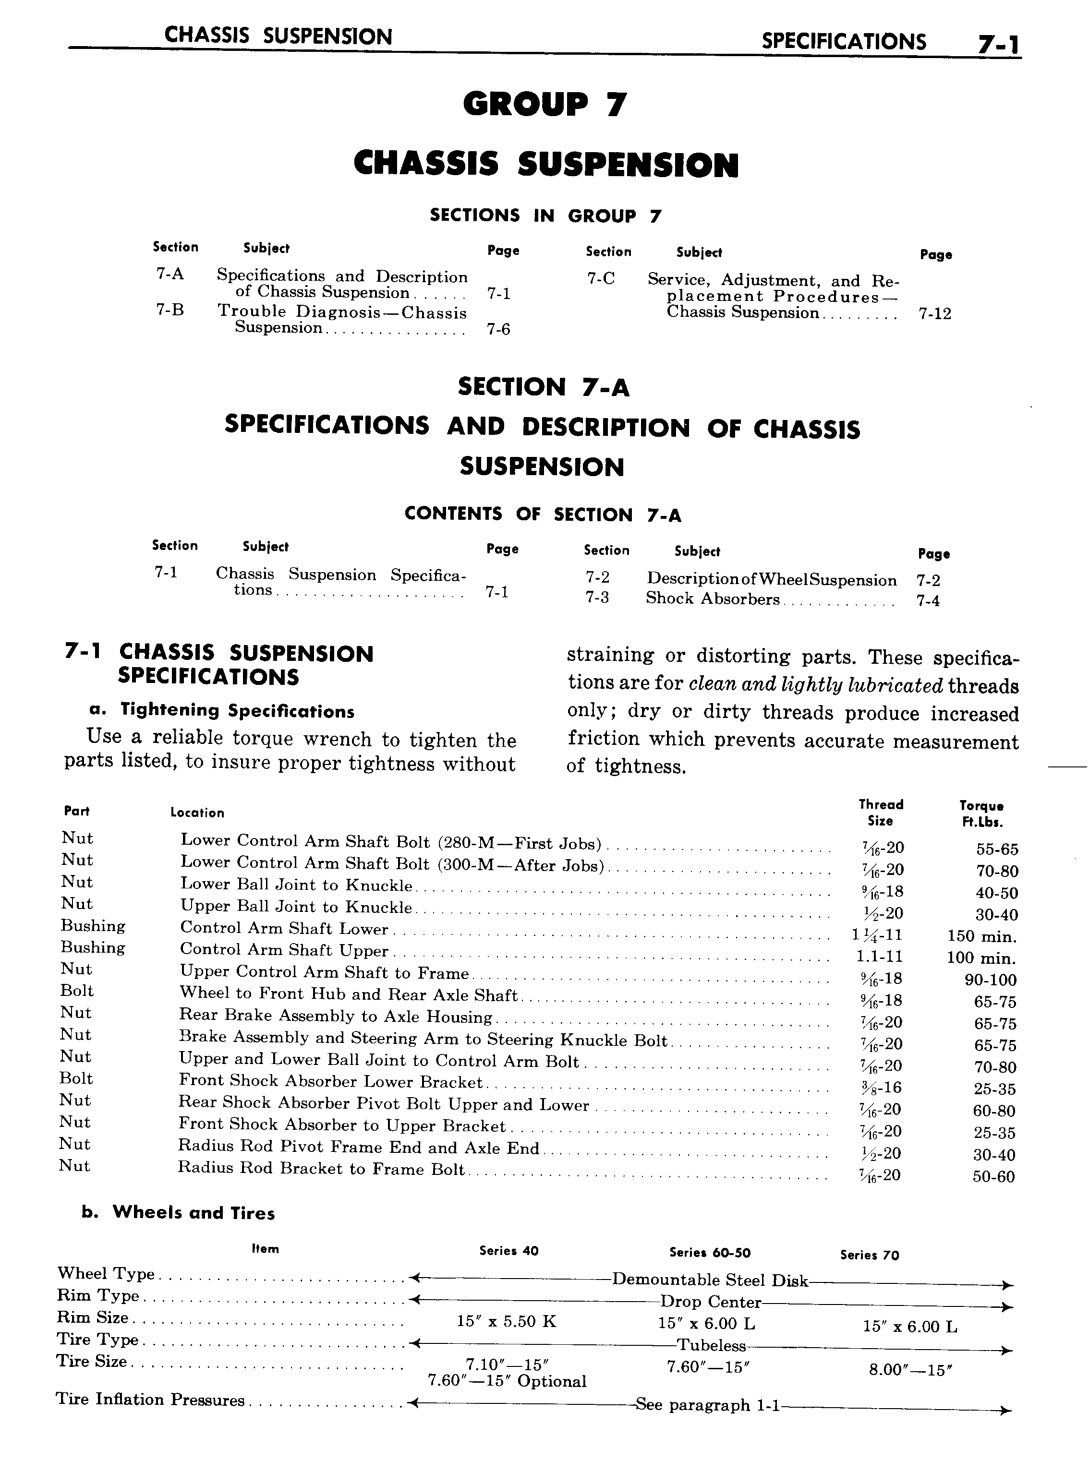 n_08 1957 Buick Shop Manual - Chassis Suspension-001-001.jpg